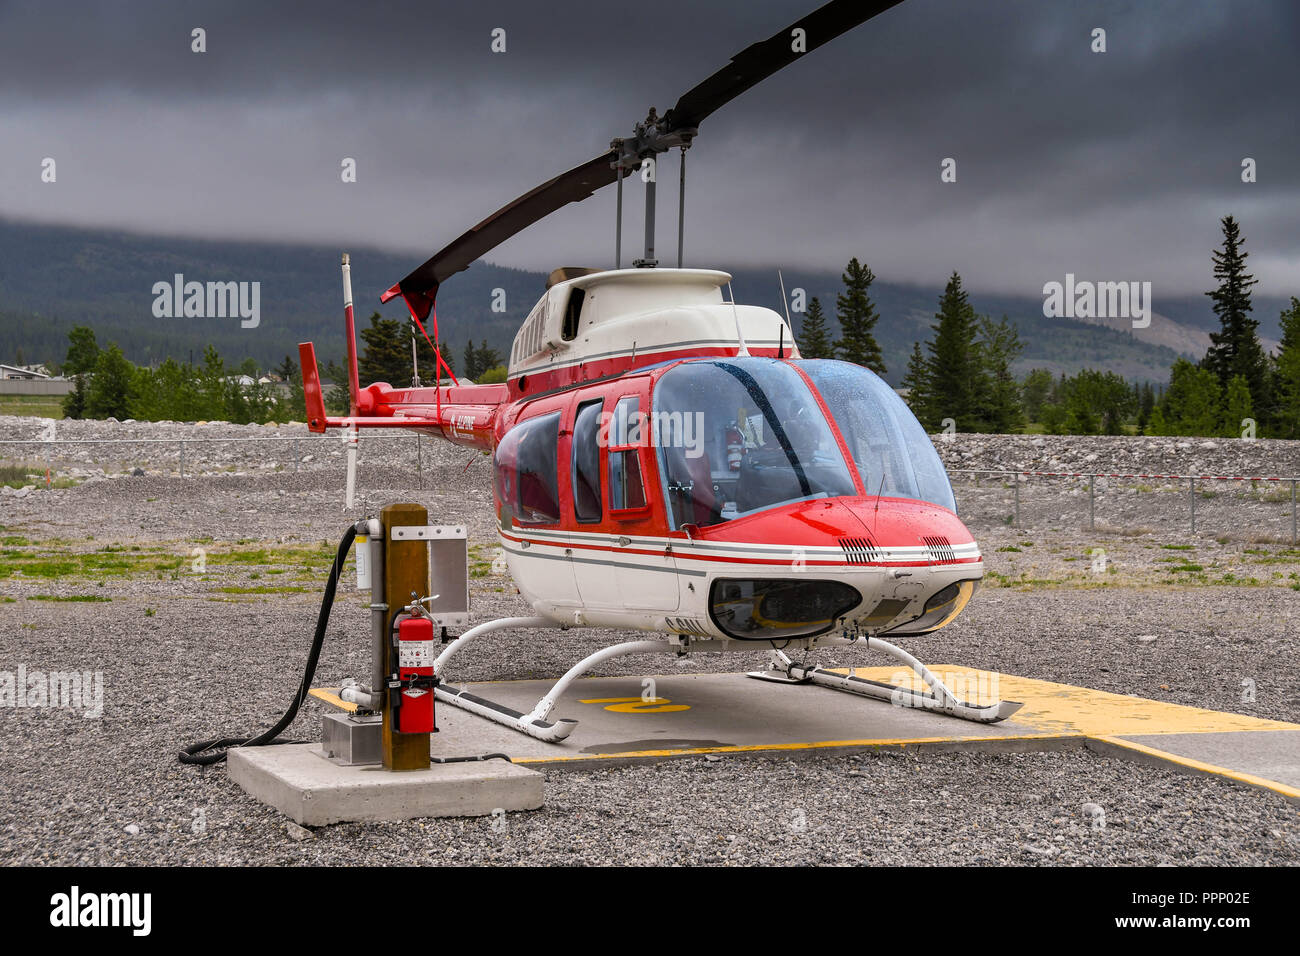 CANMORE, ALBERTA, CANADA - JUNE 2018: Bell 206 Longranger helicopter operated by Alpine Helicopters from its base in Canmore, Stock Photo